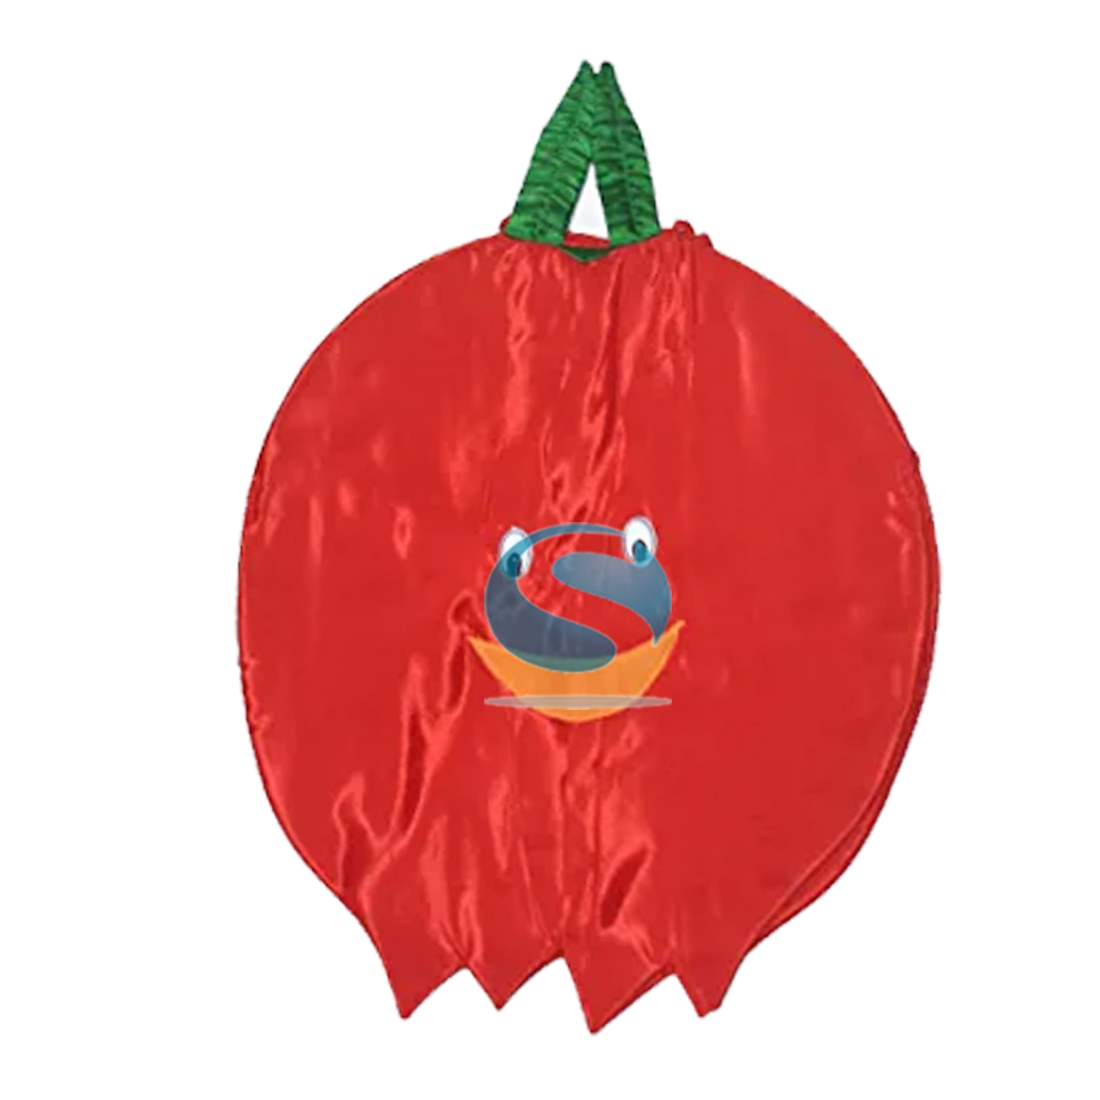 Fruit Mascot Costumes for Cosplay and Events